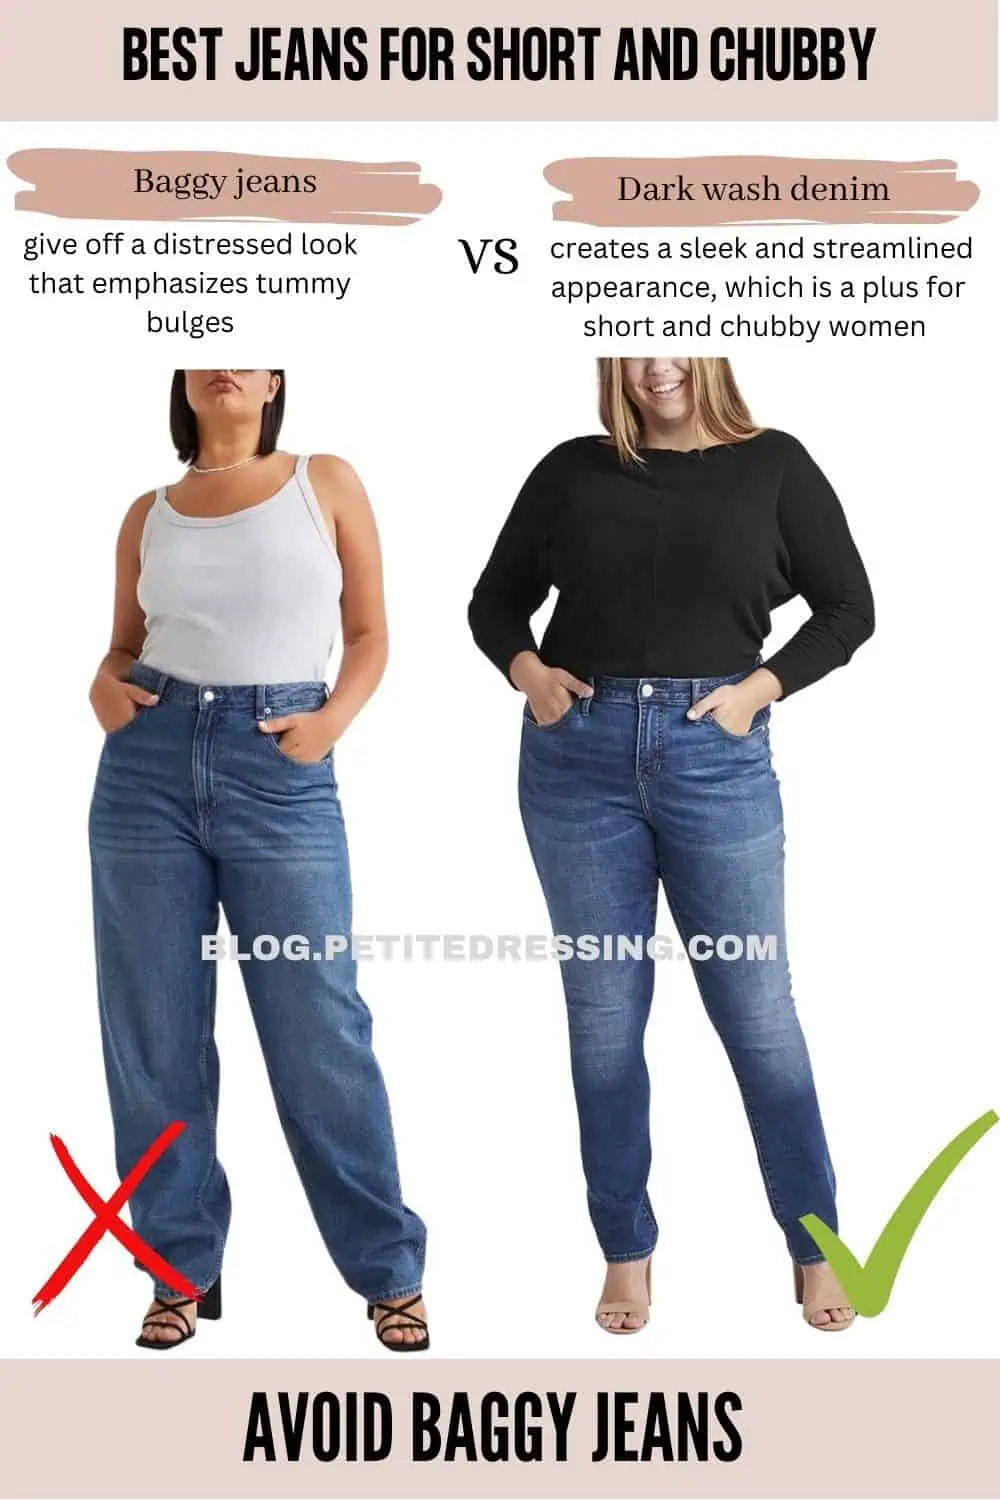 Jeans guide for short and chubby - Petite Dressing